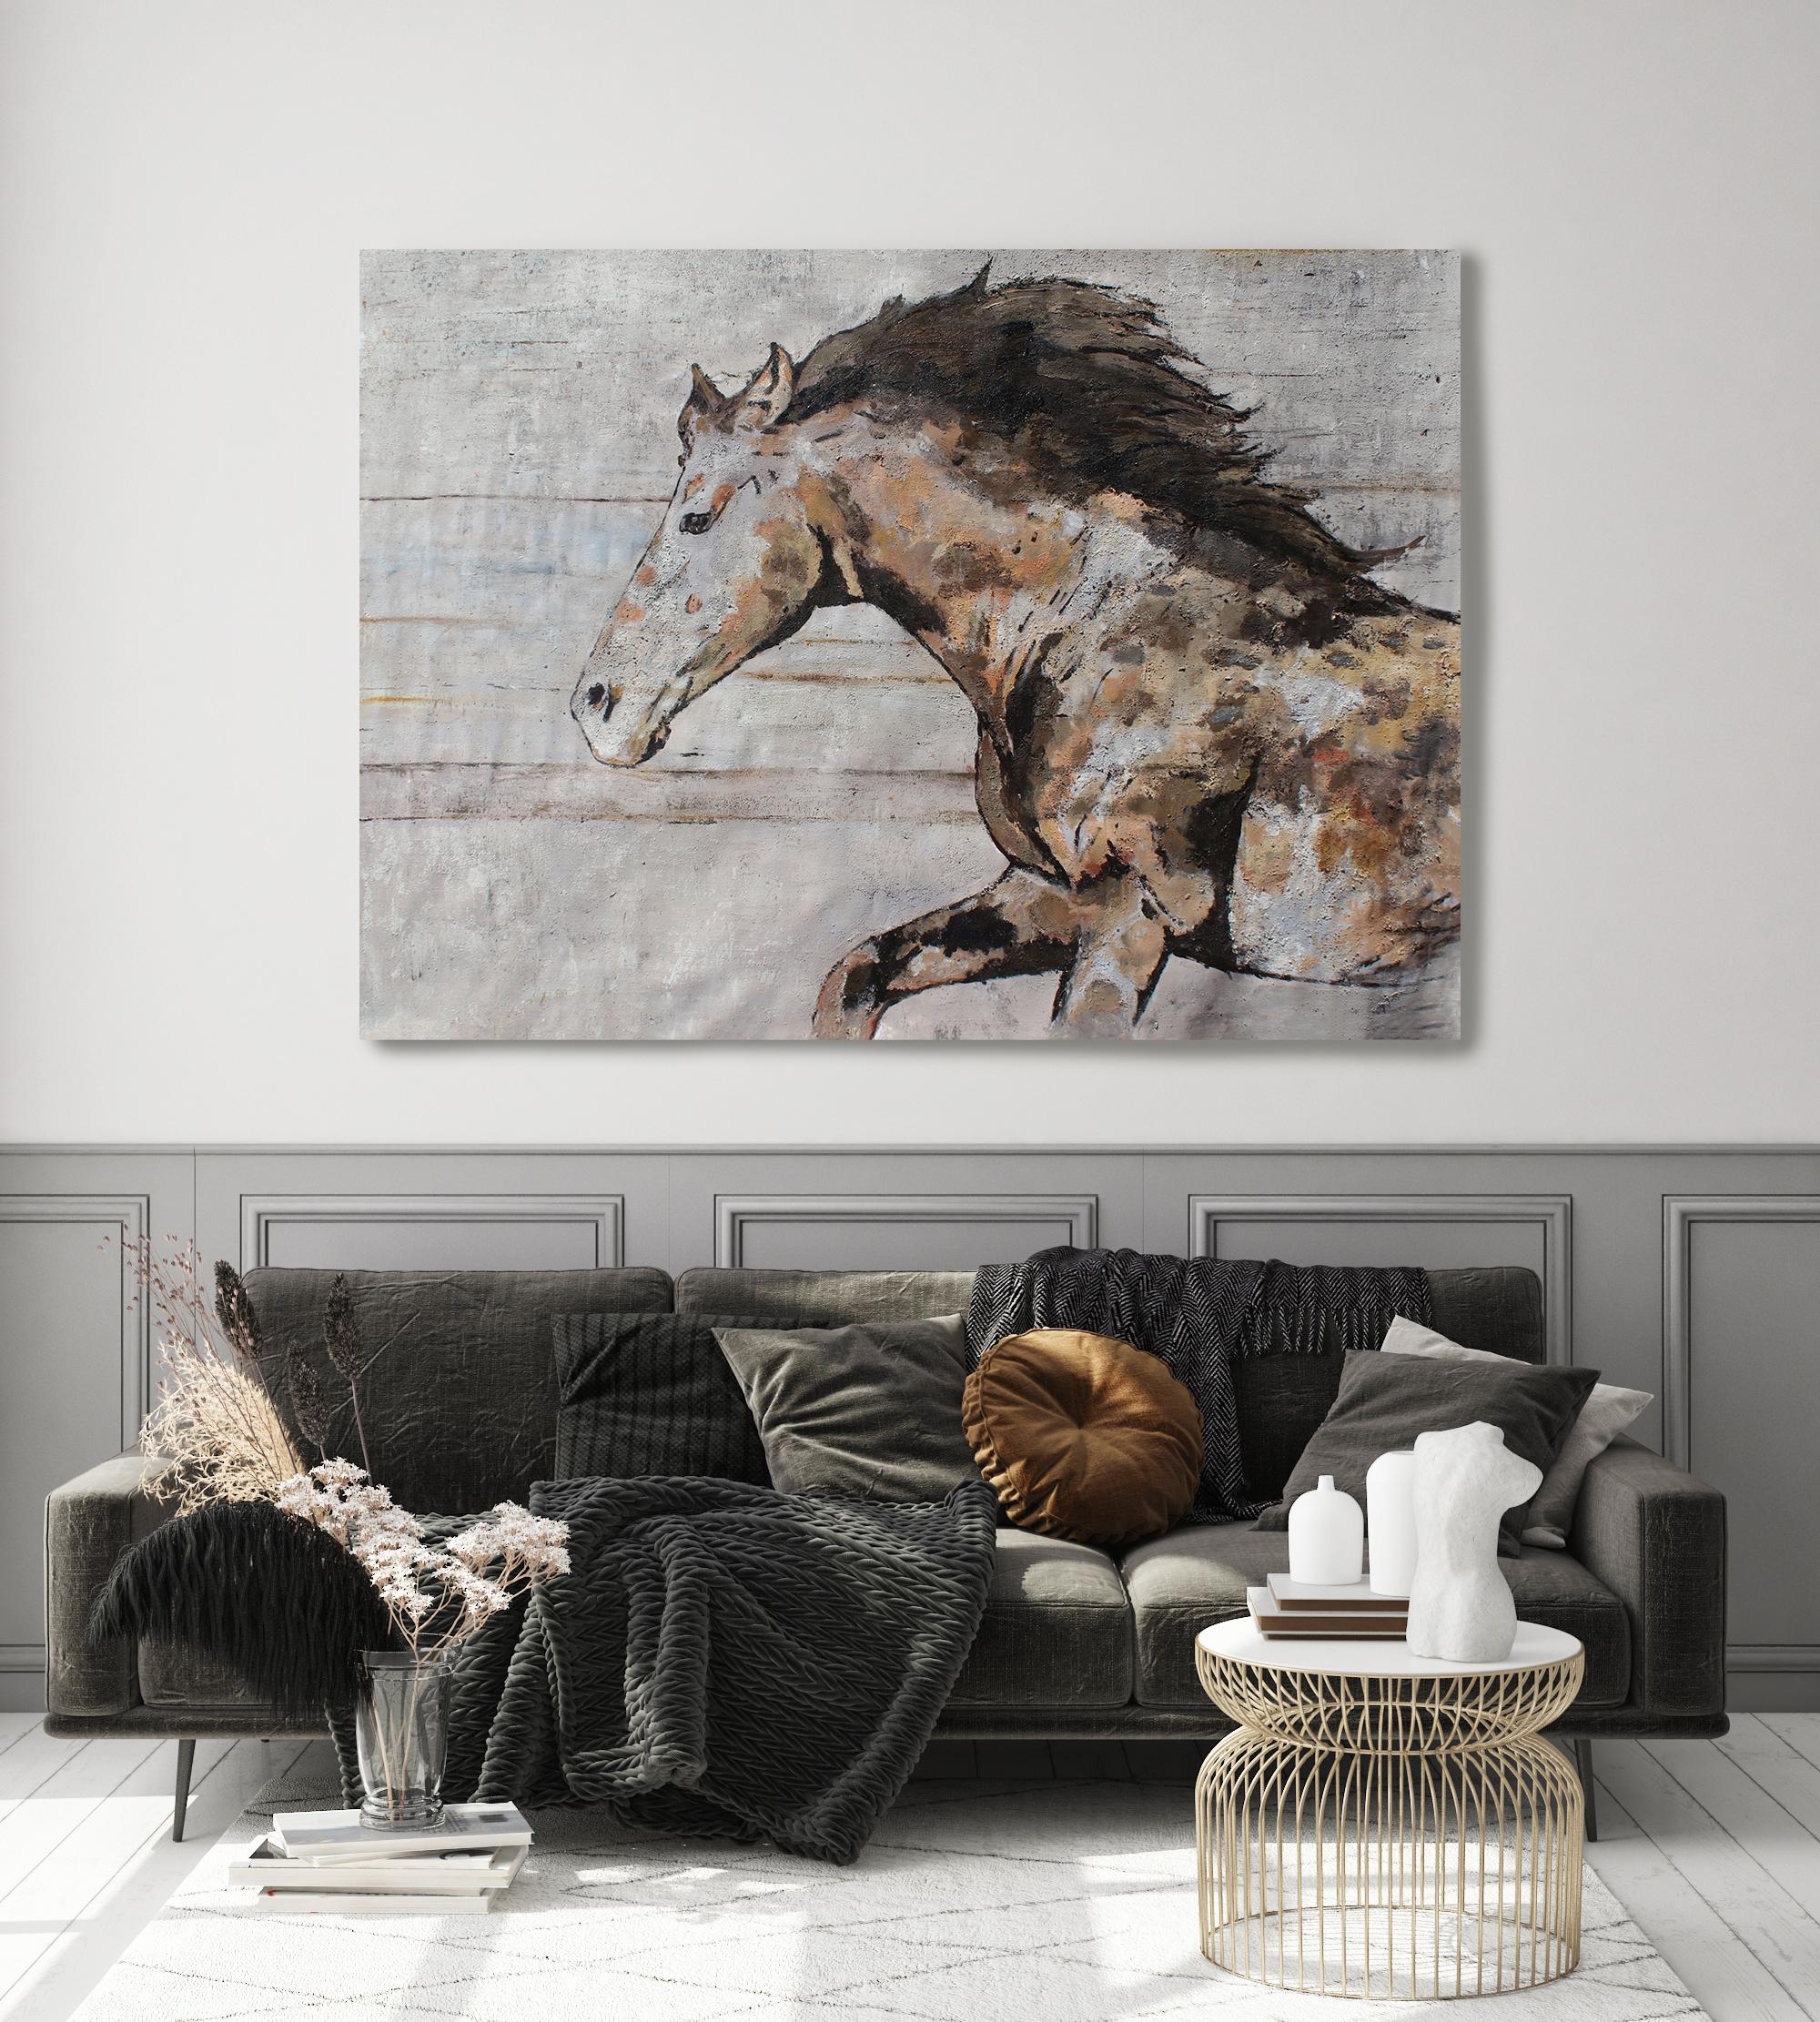 Irena Orlov Animal Painting - Natural Rustic Horse Oil Painting on Canvas, Equestrian Art 72 W X 48" H, Rolled